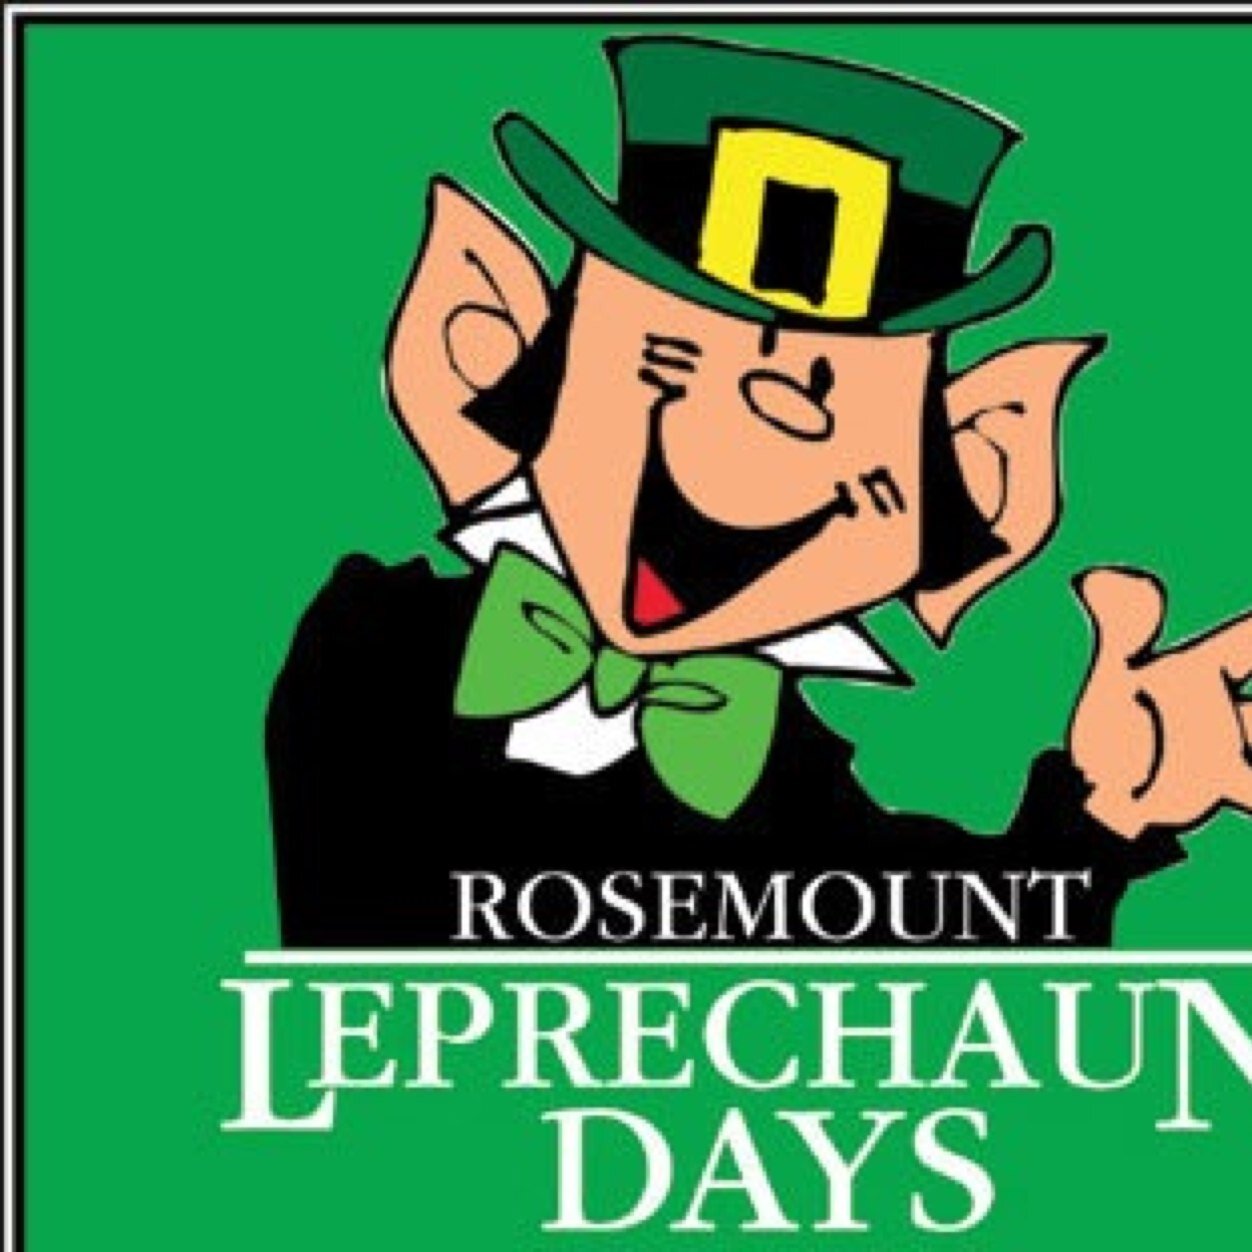 Rosemount leprechaun days is a 10 day community summer festival organize by all volunteers committee.